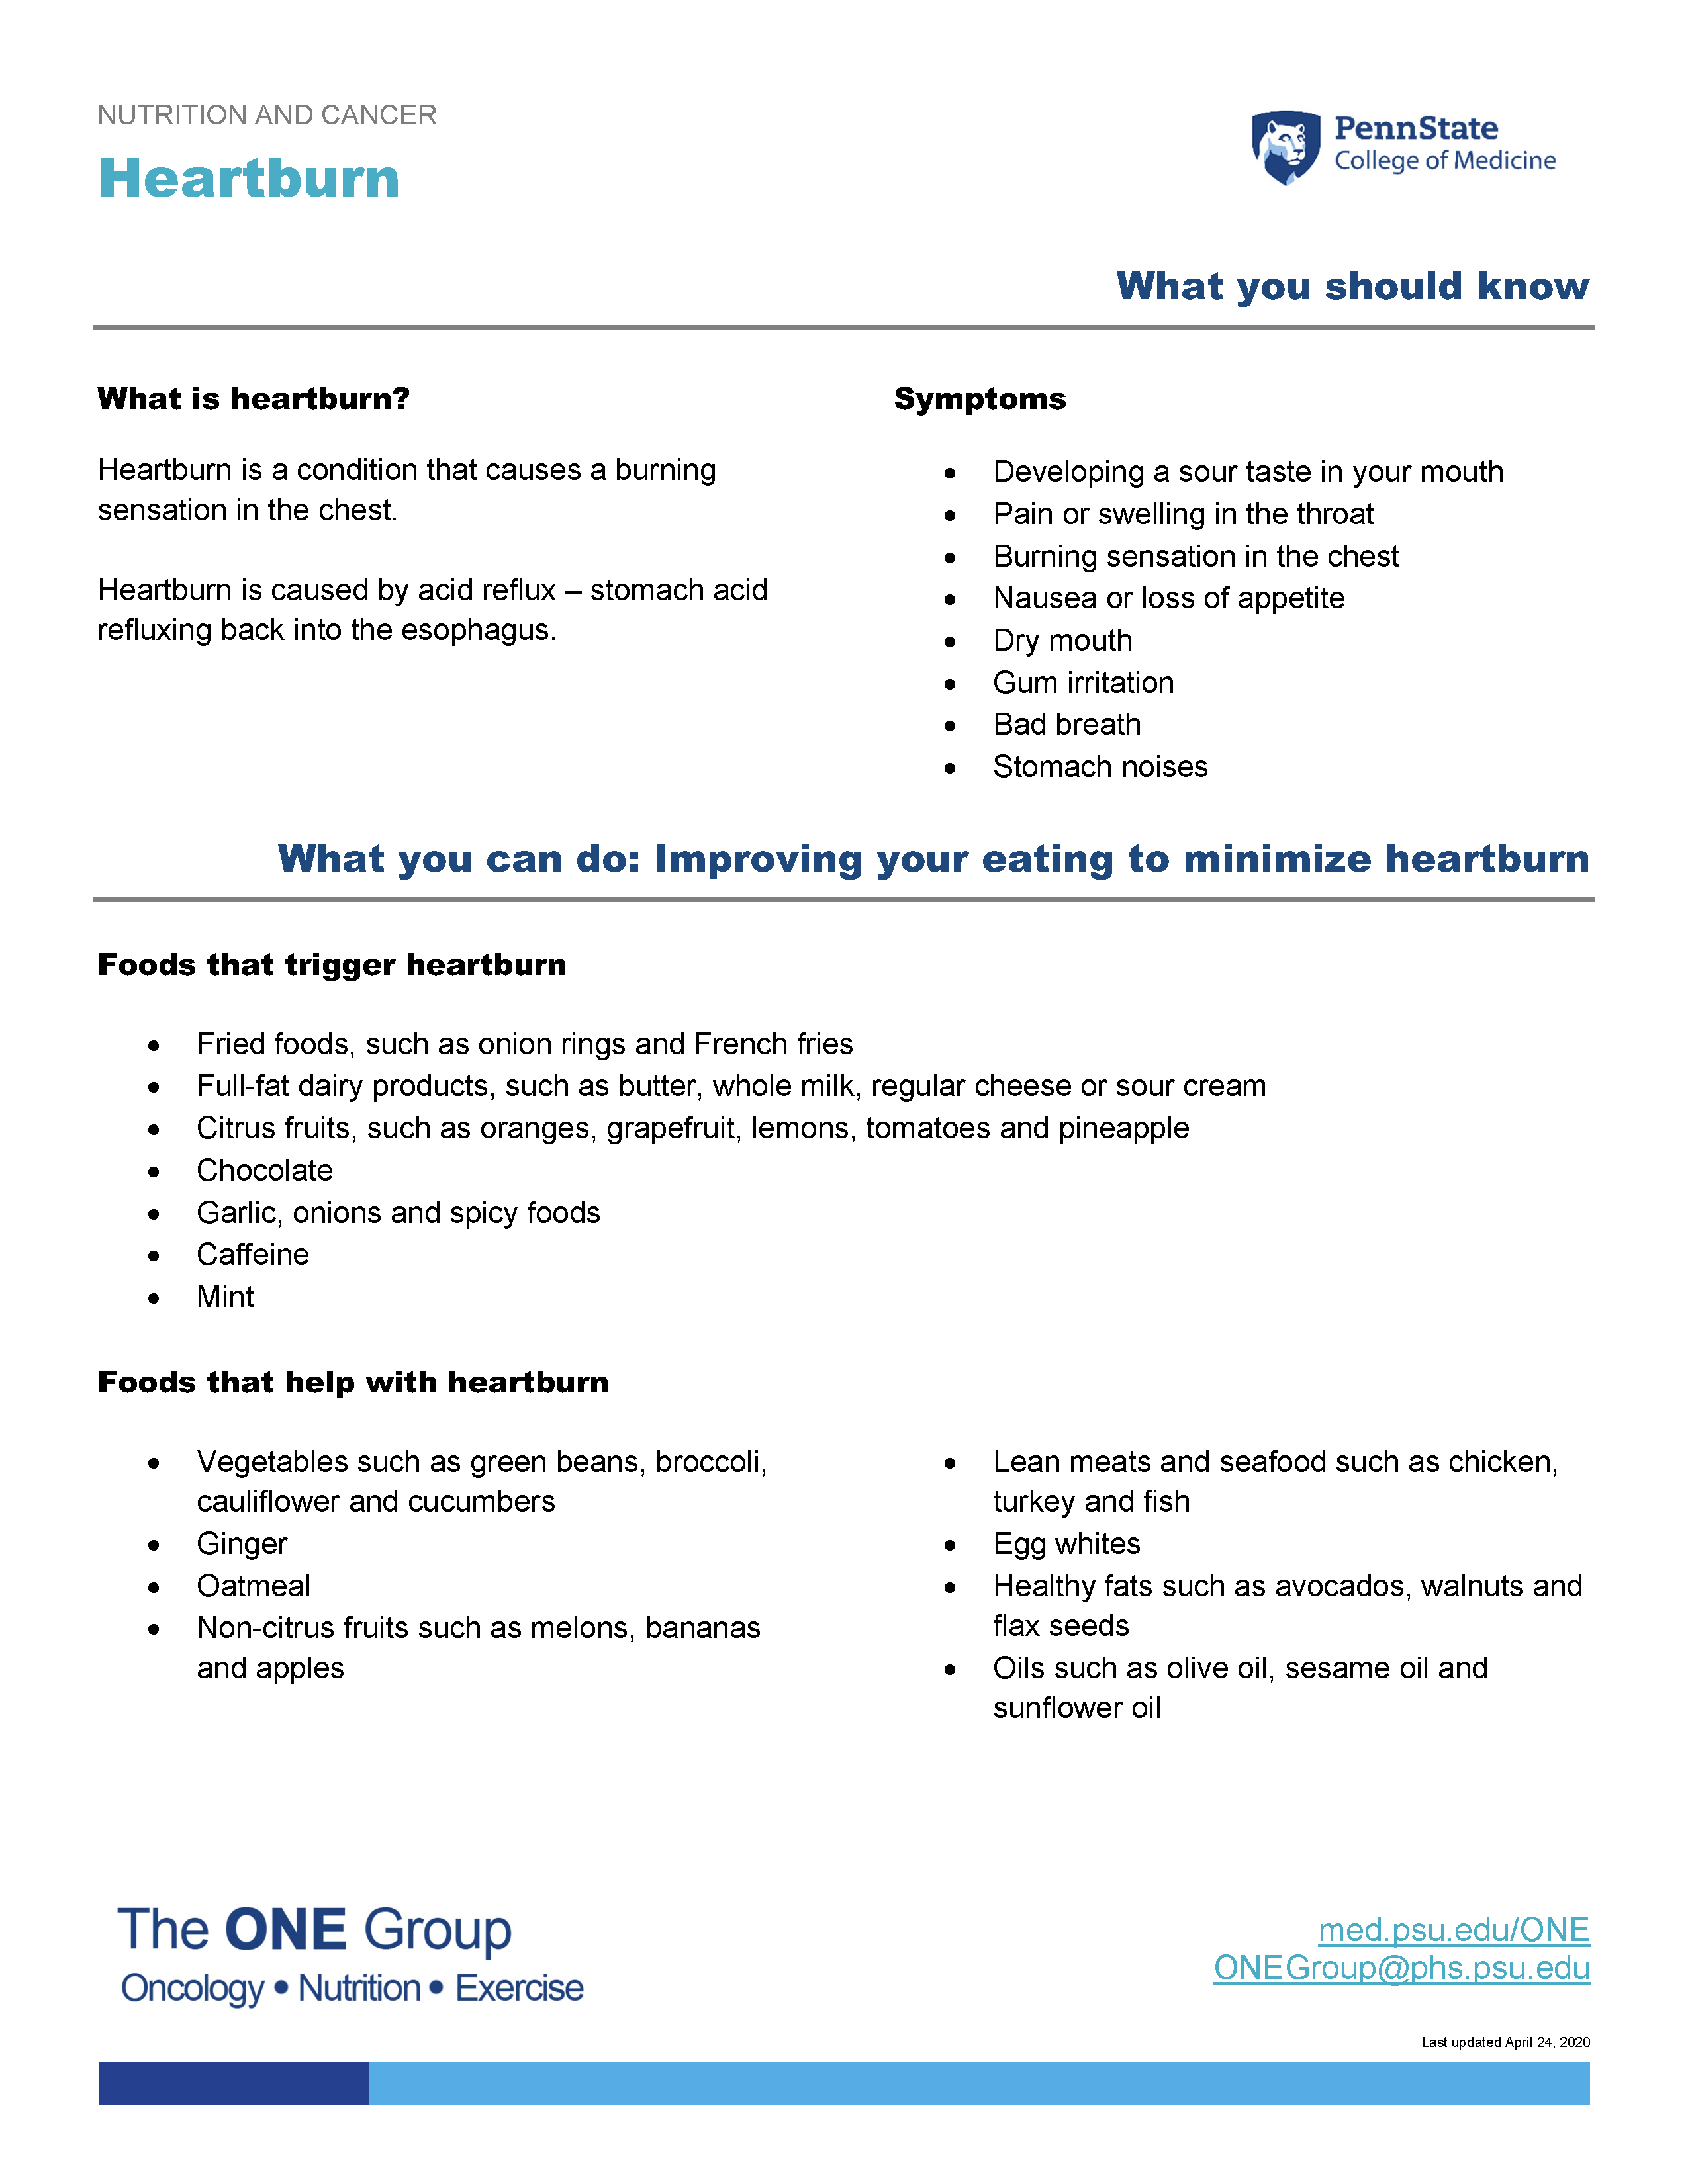 The heartburn guide from The ONE Group includes the information on this page, formatted for print.